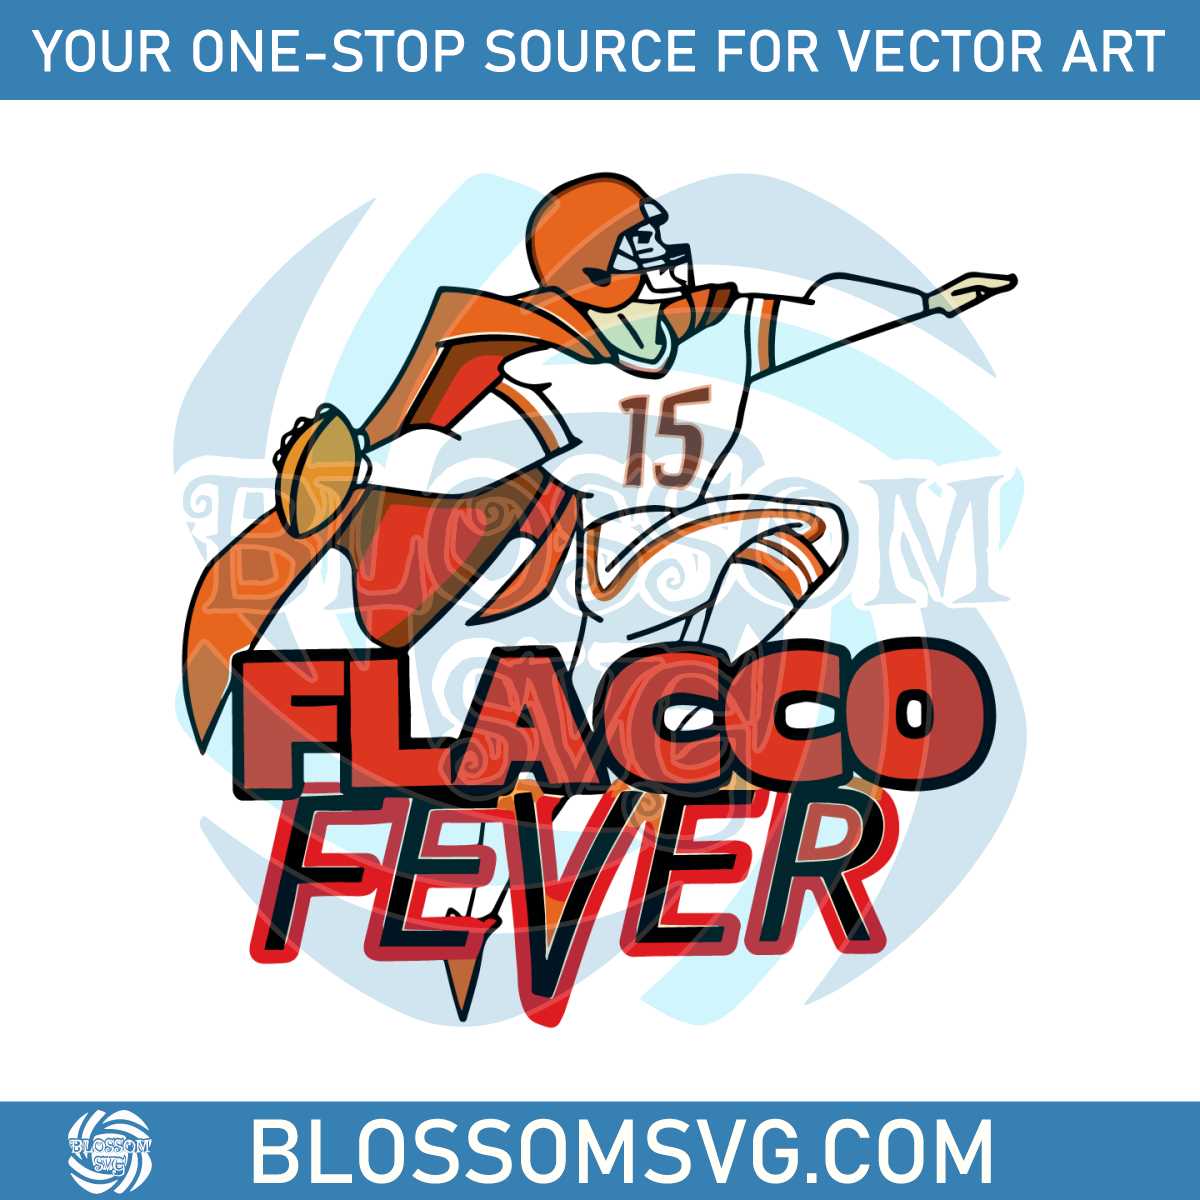 cleveland-browns-wacko-for-flacco-fever-svg